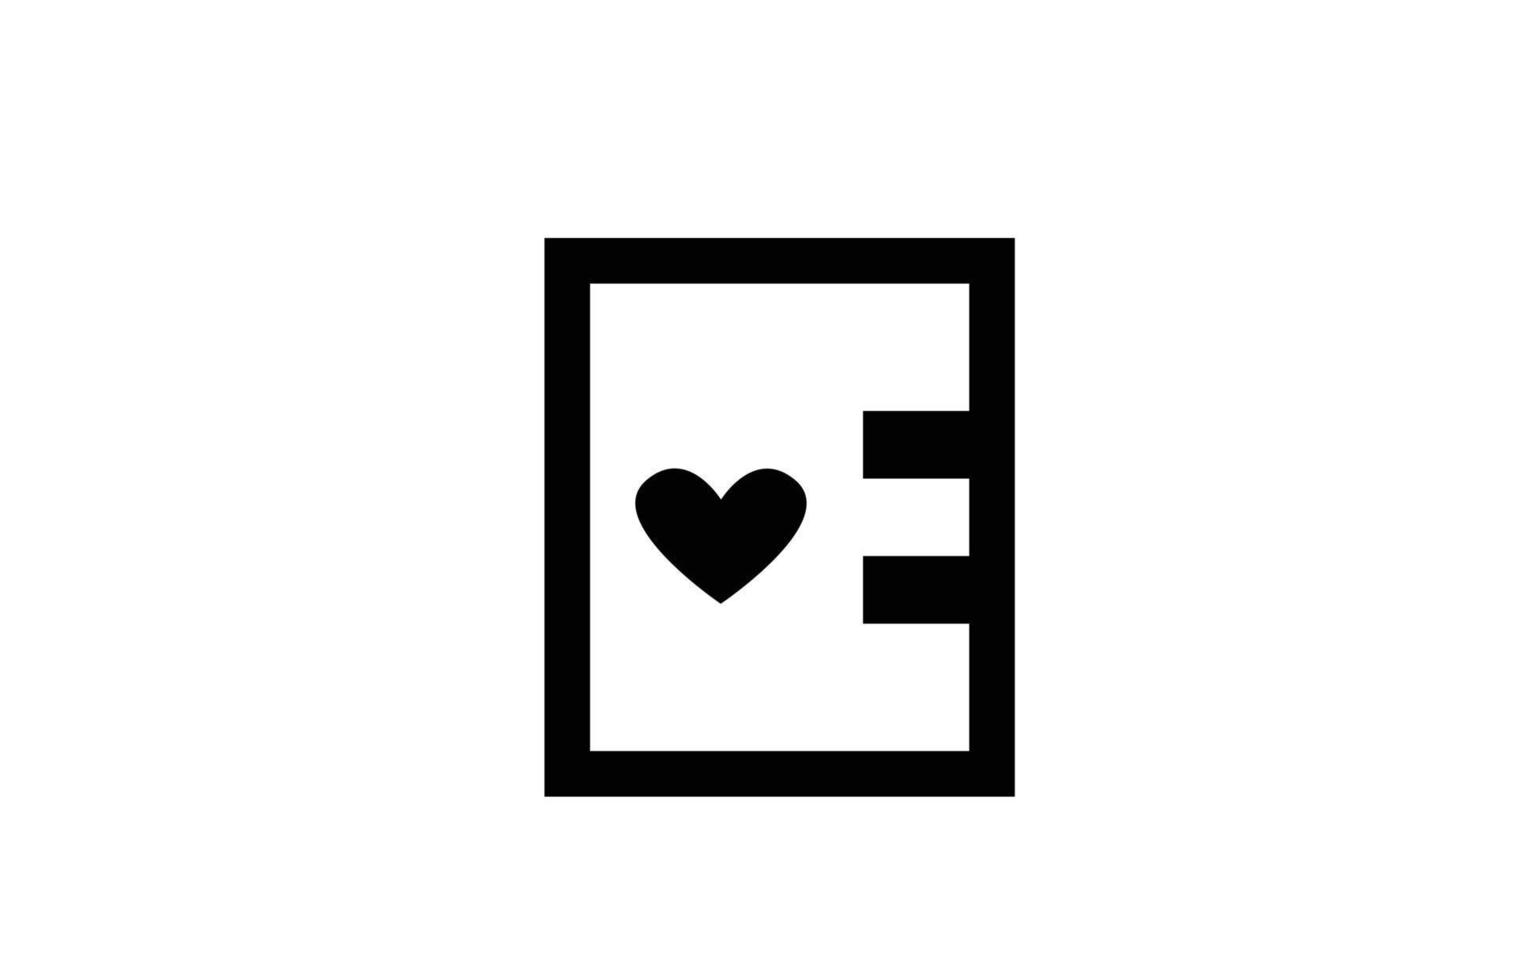 E love heart alphabet letter icon logo with black and white color and line. Creative design for company or business vector